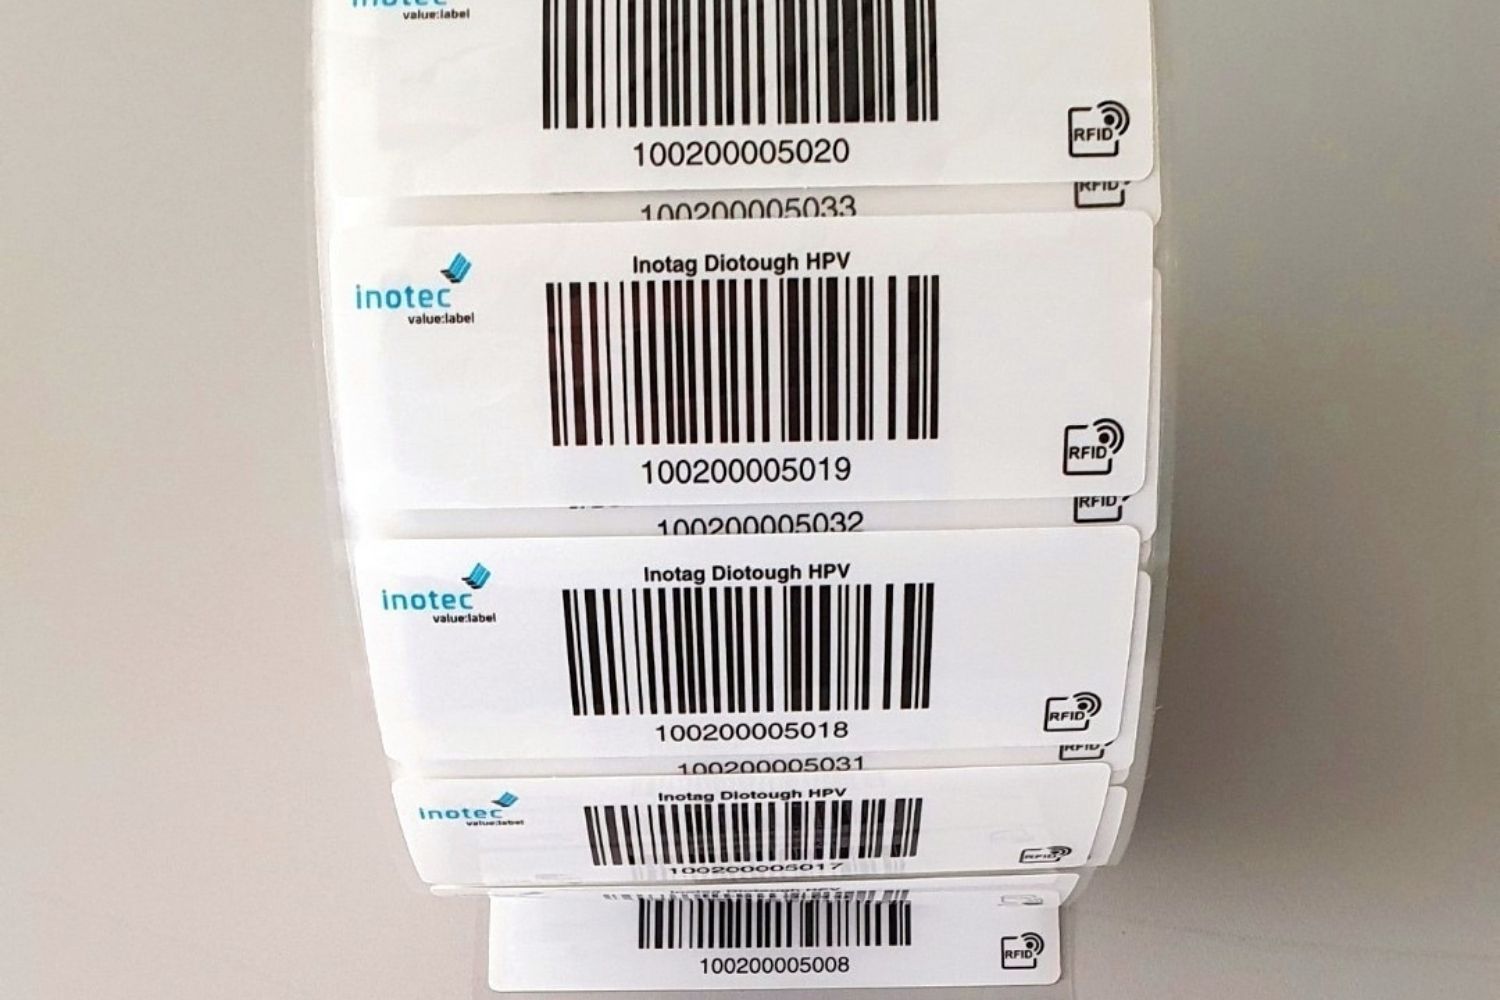 inotec Barcode RFID Solutions Diotough HPV